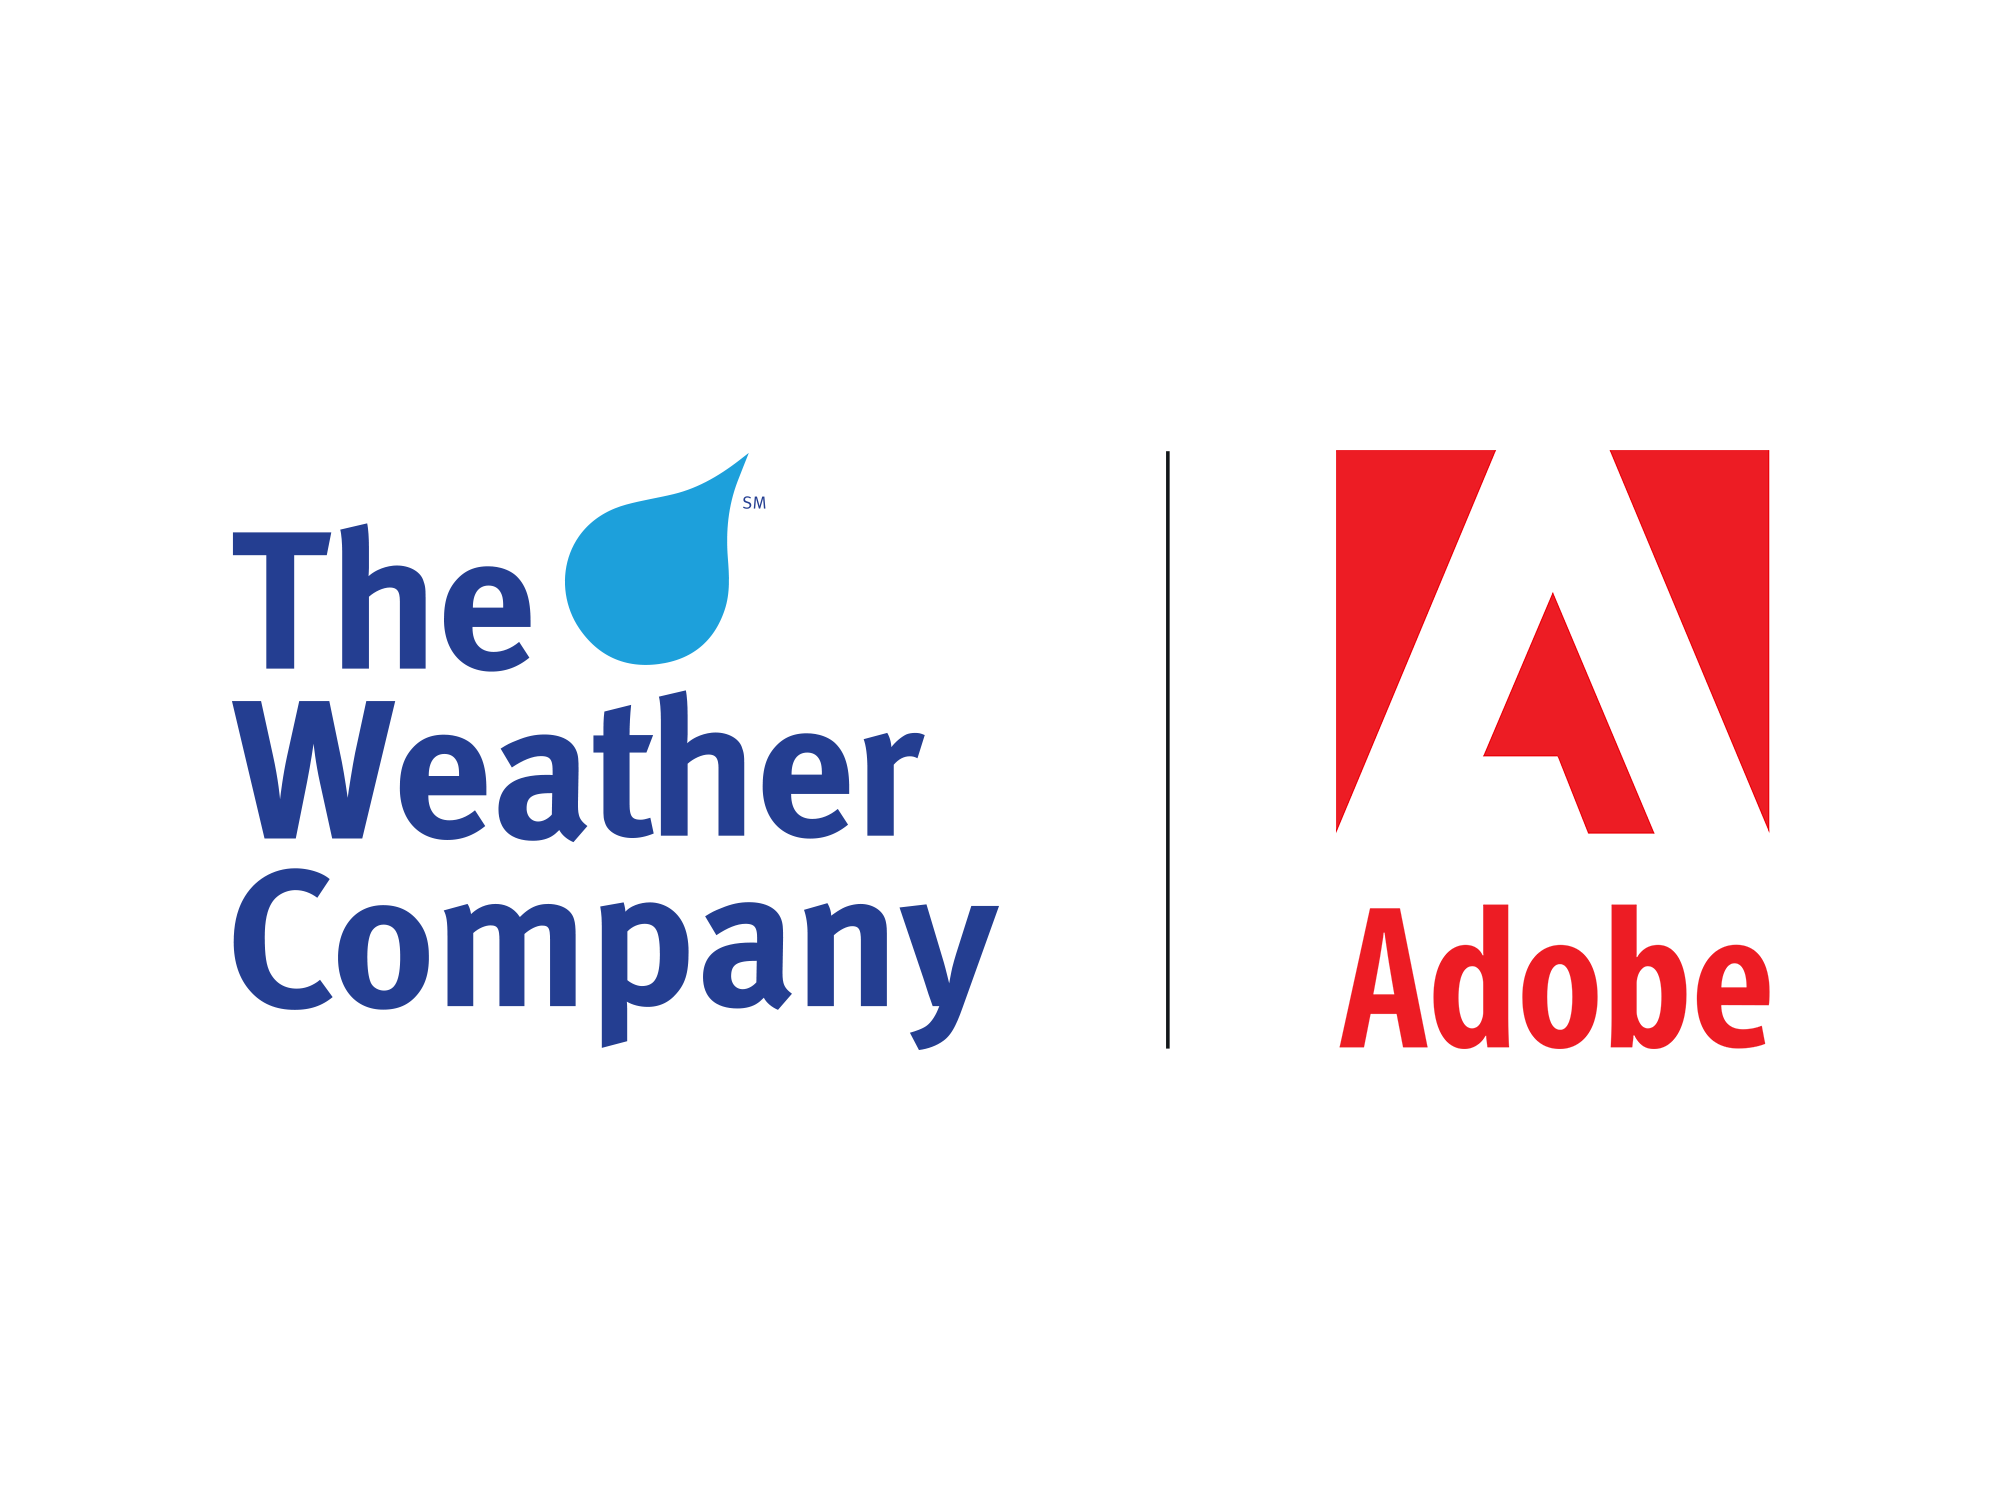 Adobe and The Weather Company logos